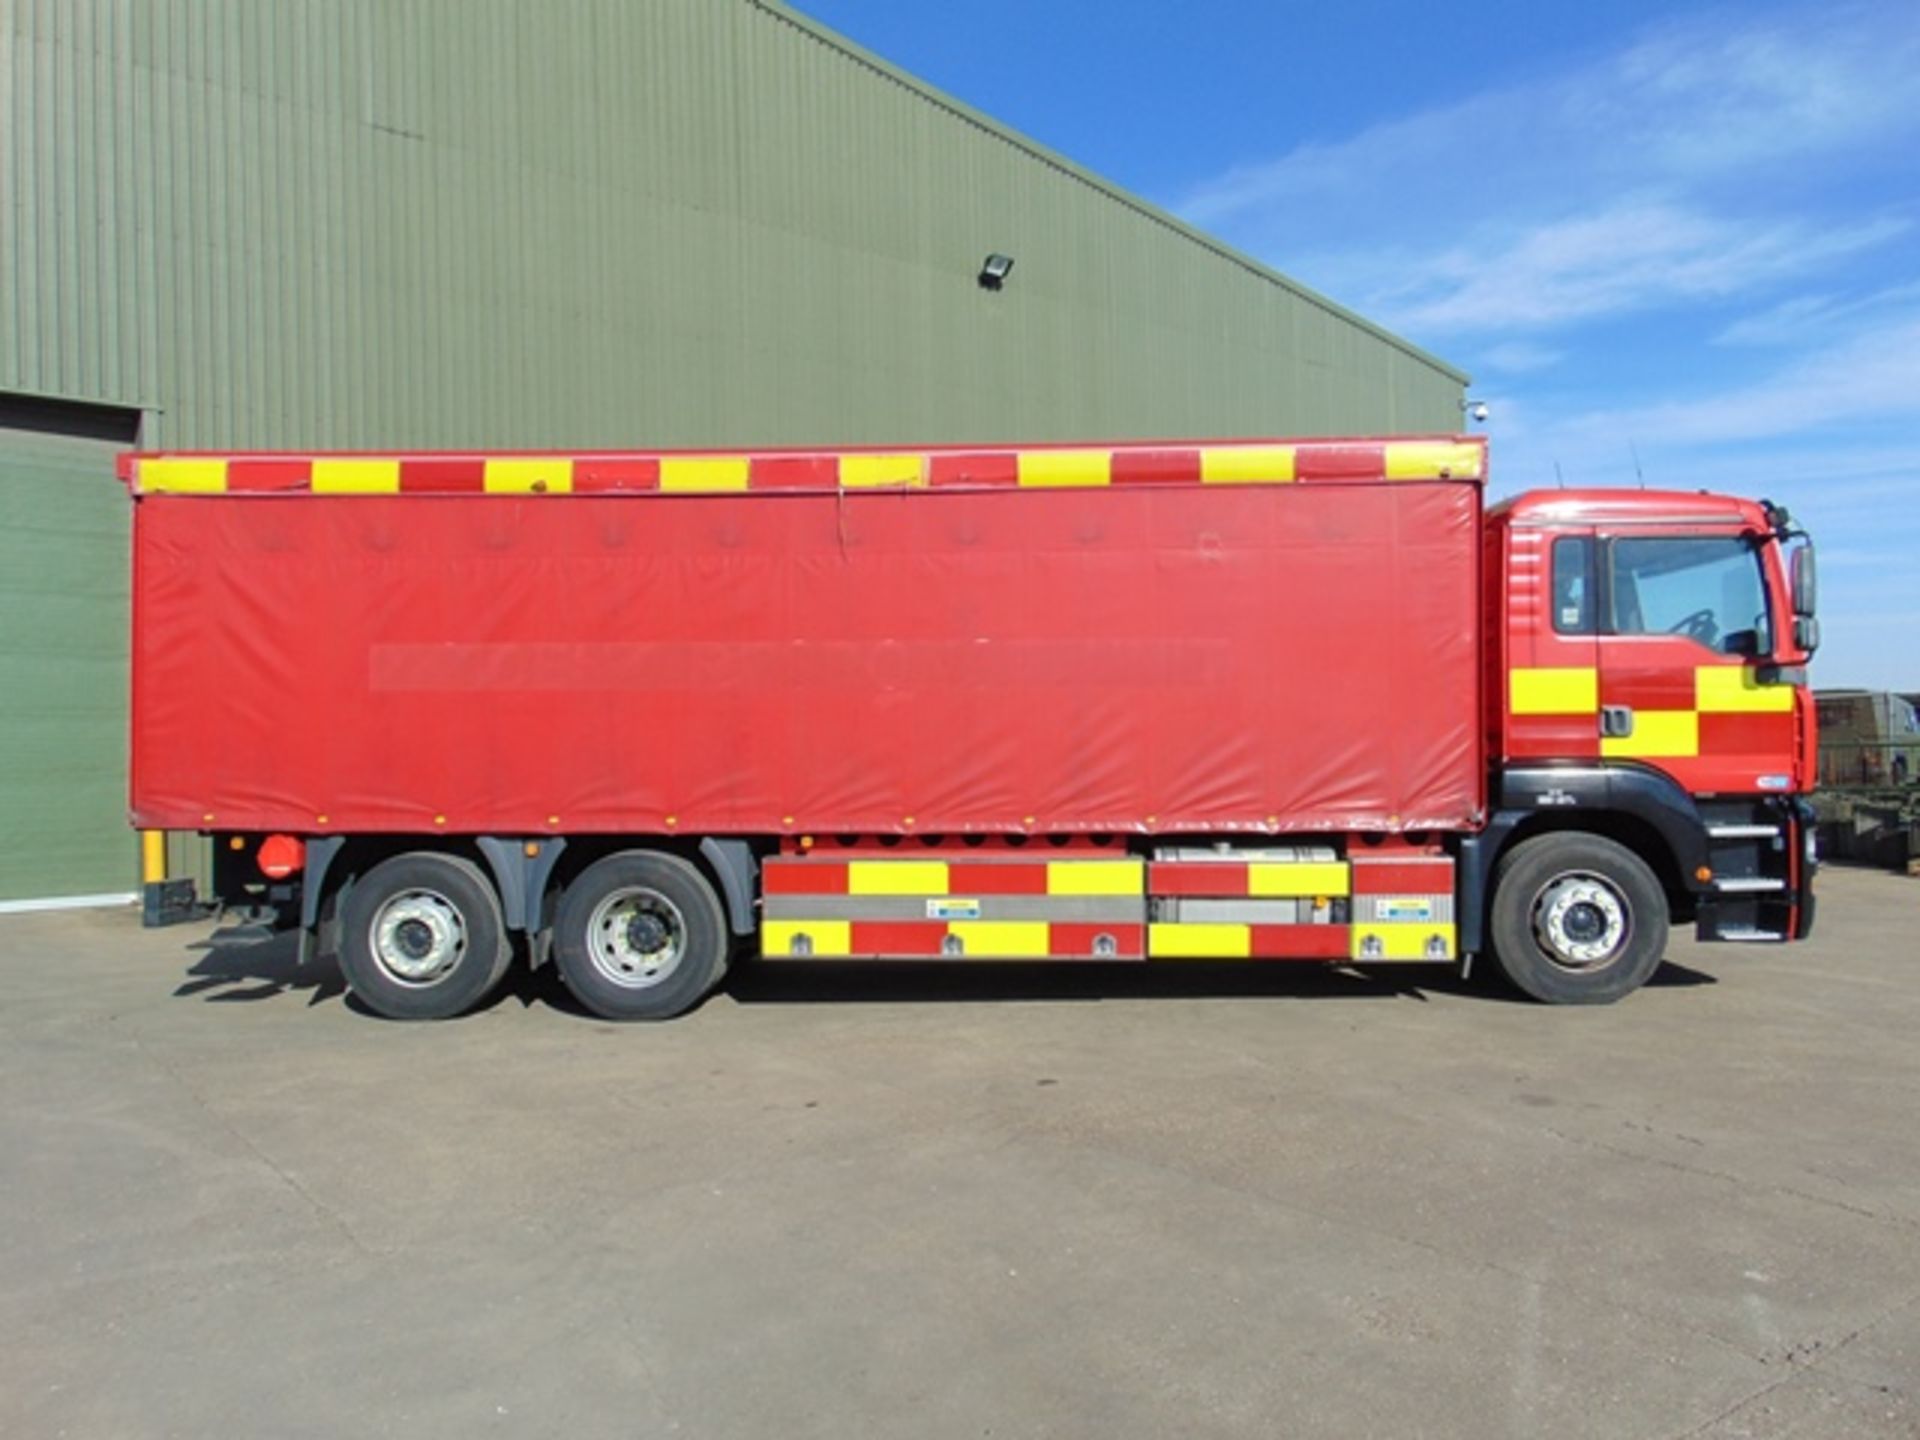 2003 MAN TG-A 6x2 Rear Steer Incident Support Unit - Image 6 of 27